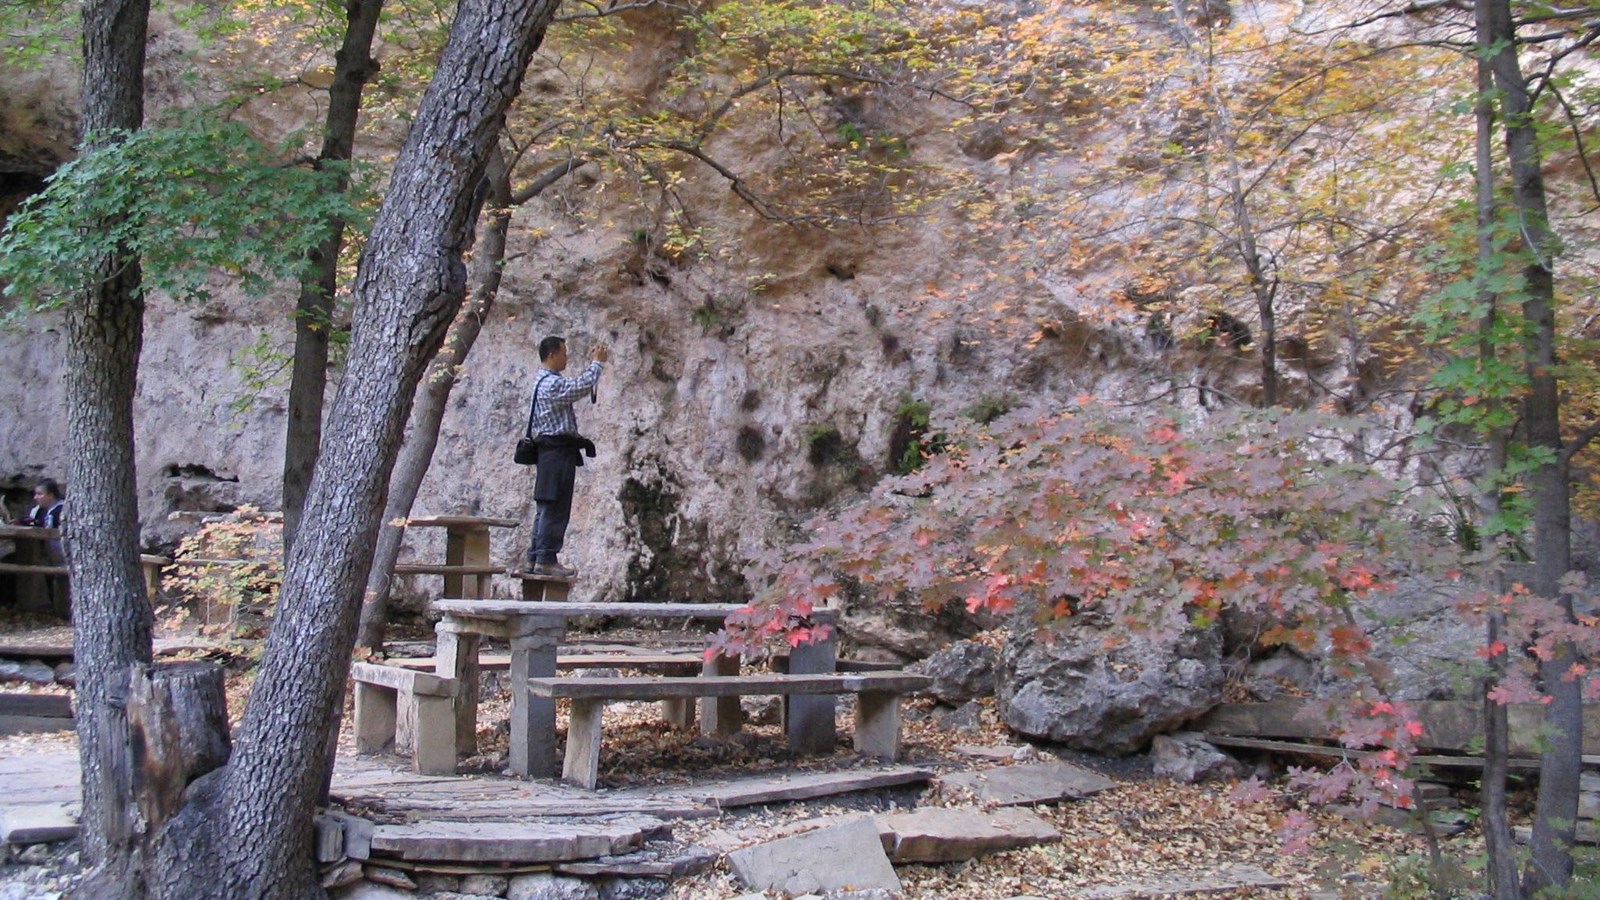 A man use a camera near an open cave feature with stone benches and tables.